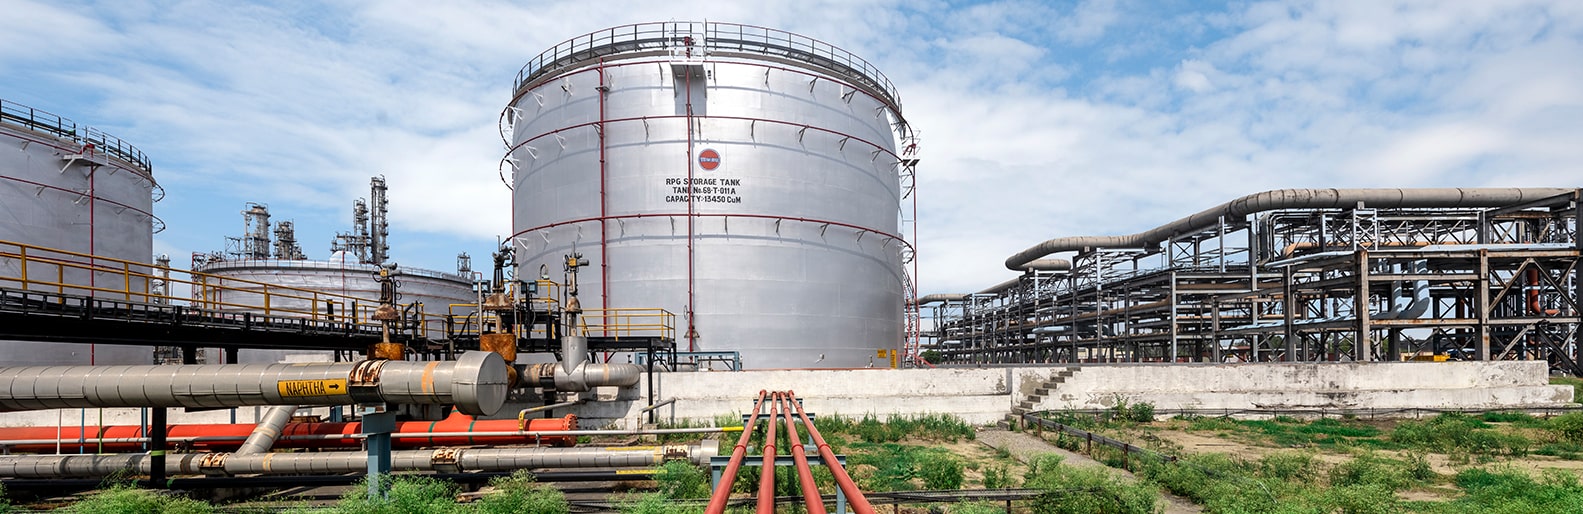 About us - IndianOil | Oil and Gas Company in India